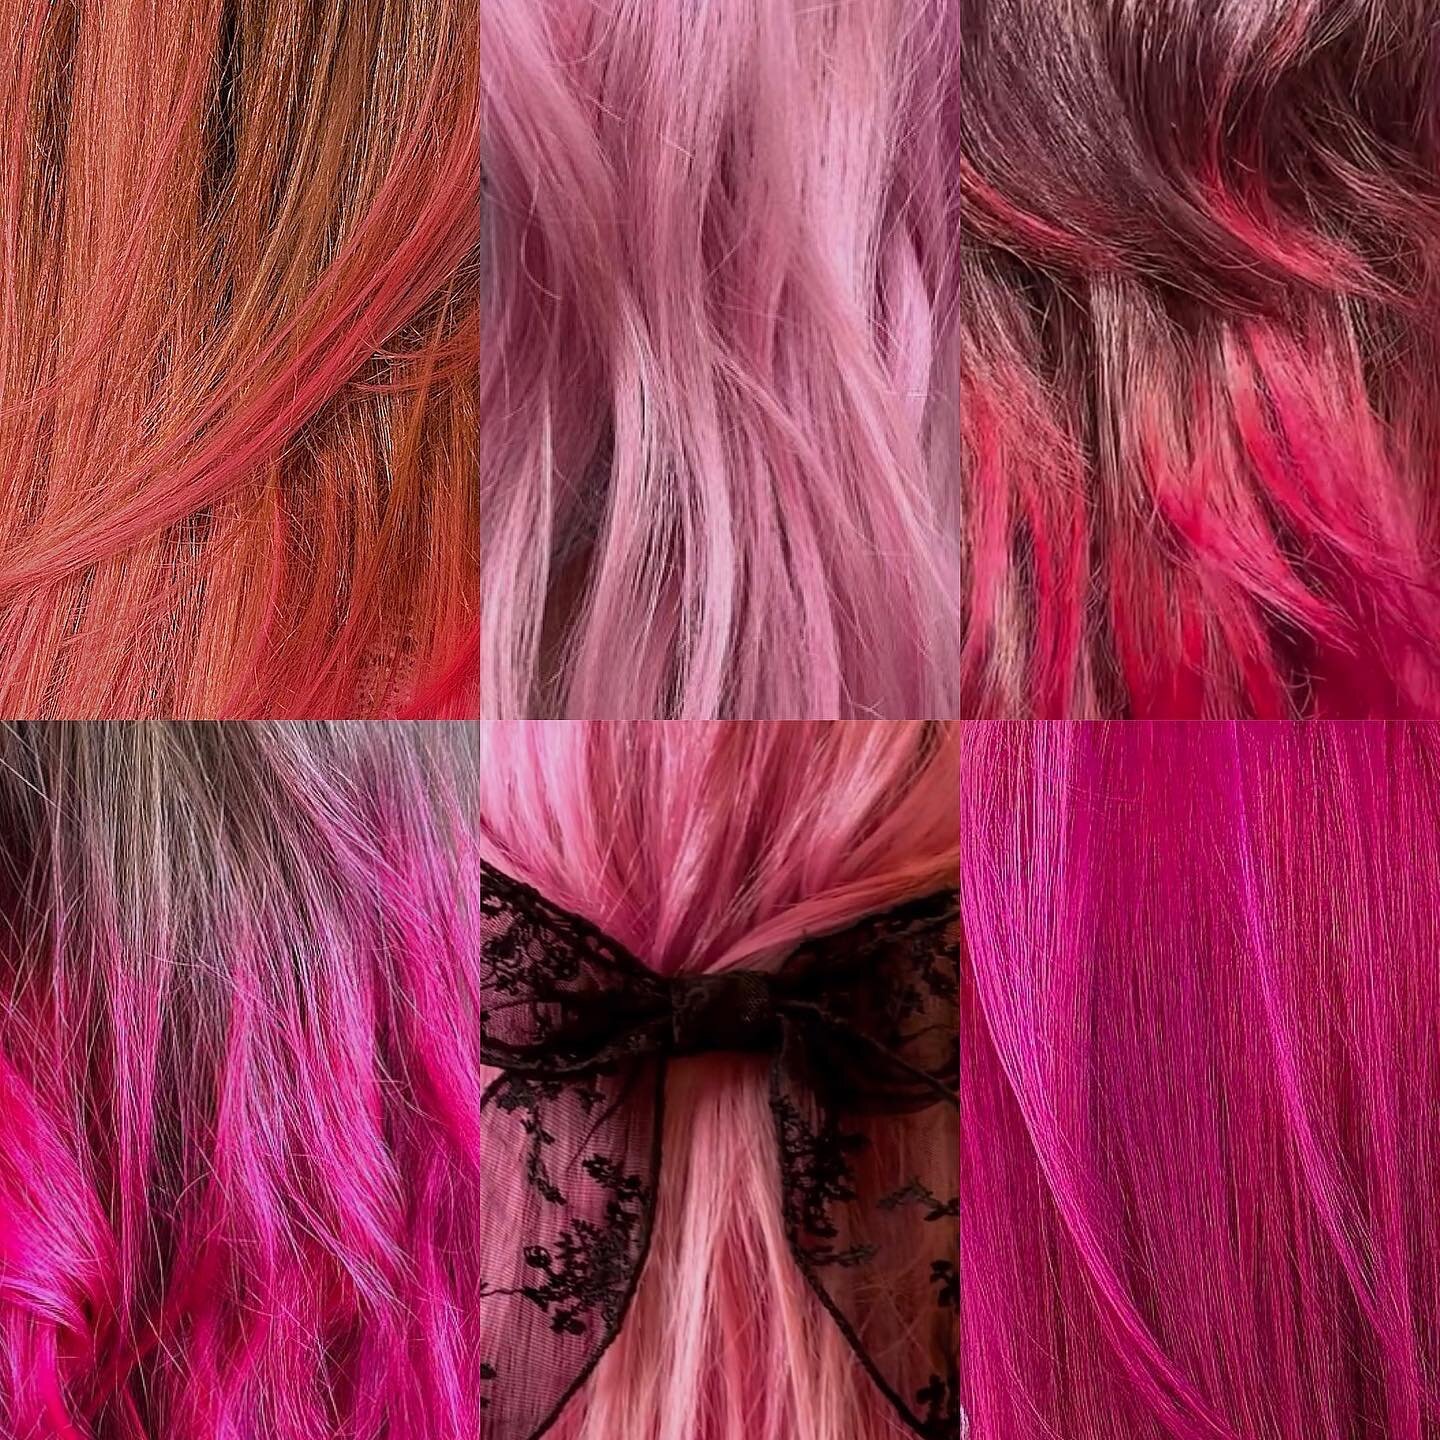 pretty in pink 🎀💗 some #ValentinesDay inspired hair by our stylists ⋆𐙚₊˚⊹♡
-
@melbpainting 
@kutsbykass 
@jlitt.hair 
@samiislices